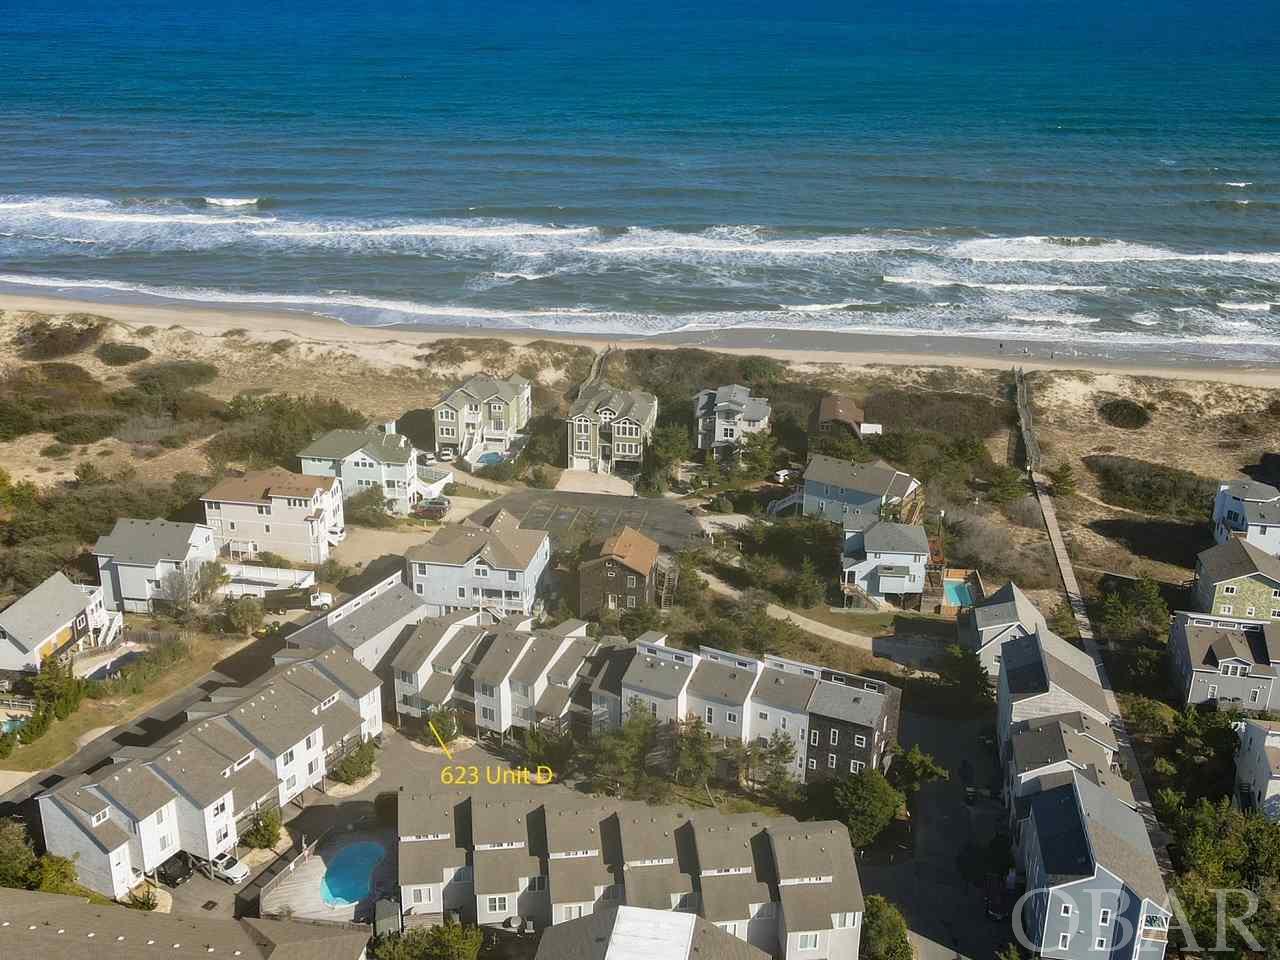 623 - D Sand Fiddler Circle Unit D Outer Banks Home Listings - Holleay Parcker - Spinnaker Realty Outer Banks (OBX) Real Estate